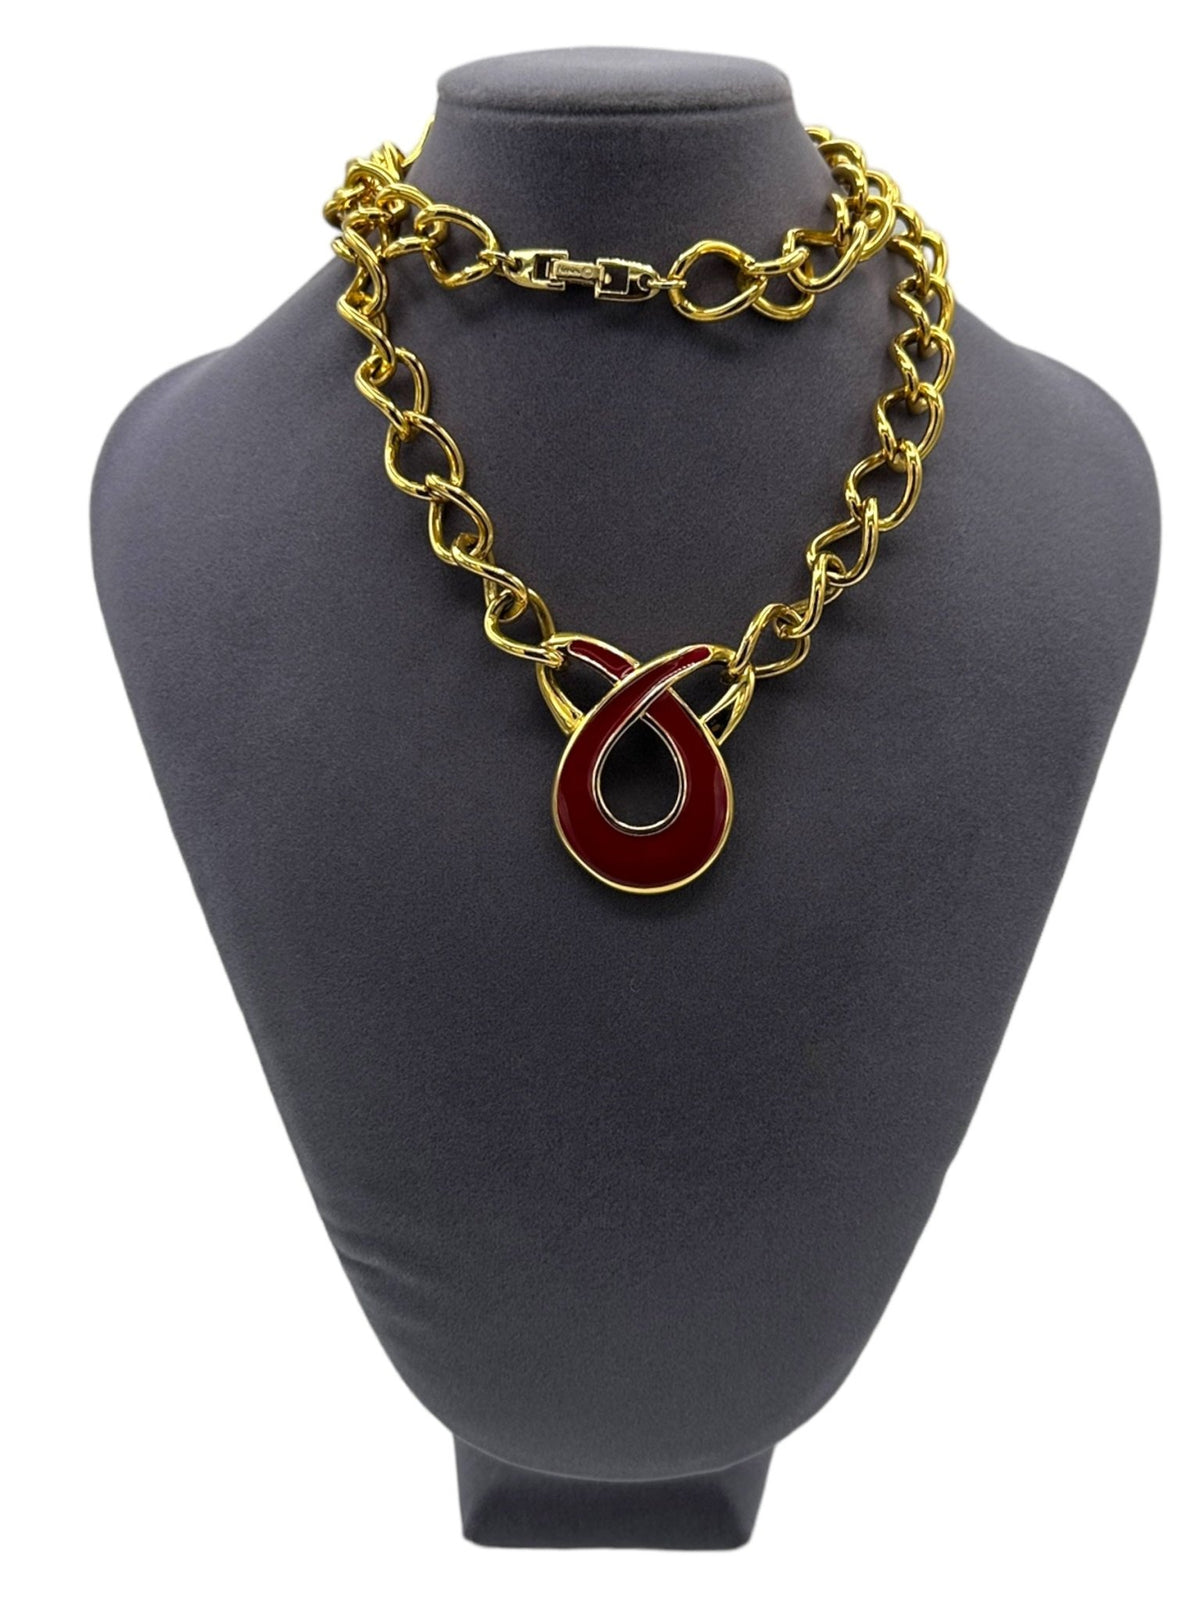 Napier Vintage Jewelry Long Gold Chain Red Enamel Pendant - 24 Wishes Vintage Jewelry